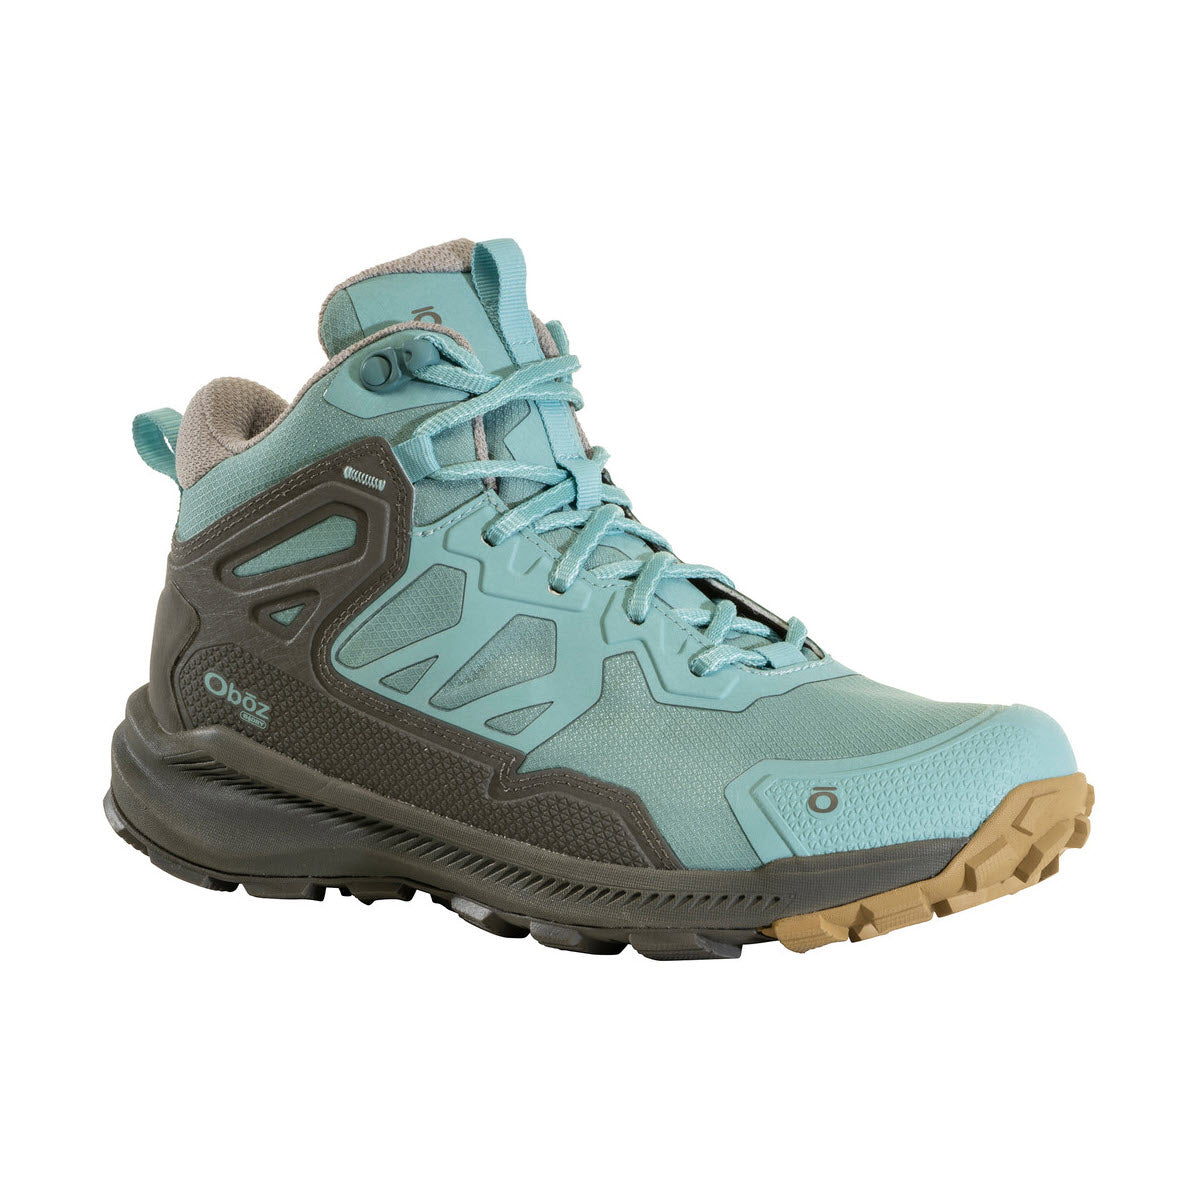 A single light blue and gray waterproof Oboz Katabatic Mid B-Dry Island hiking boot on a white background.